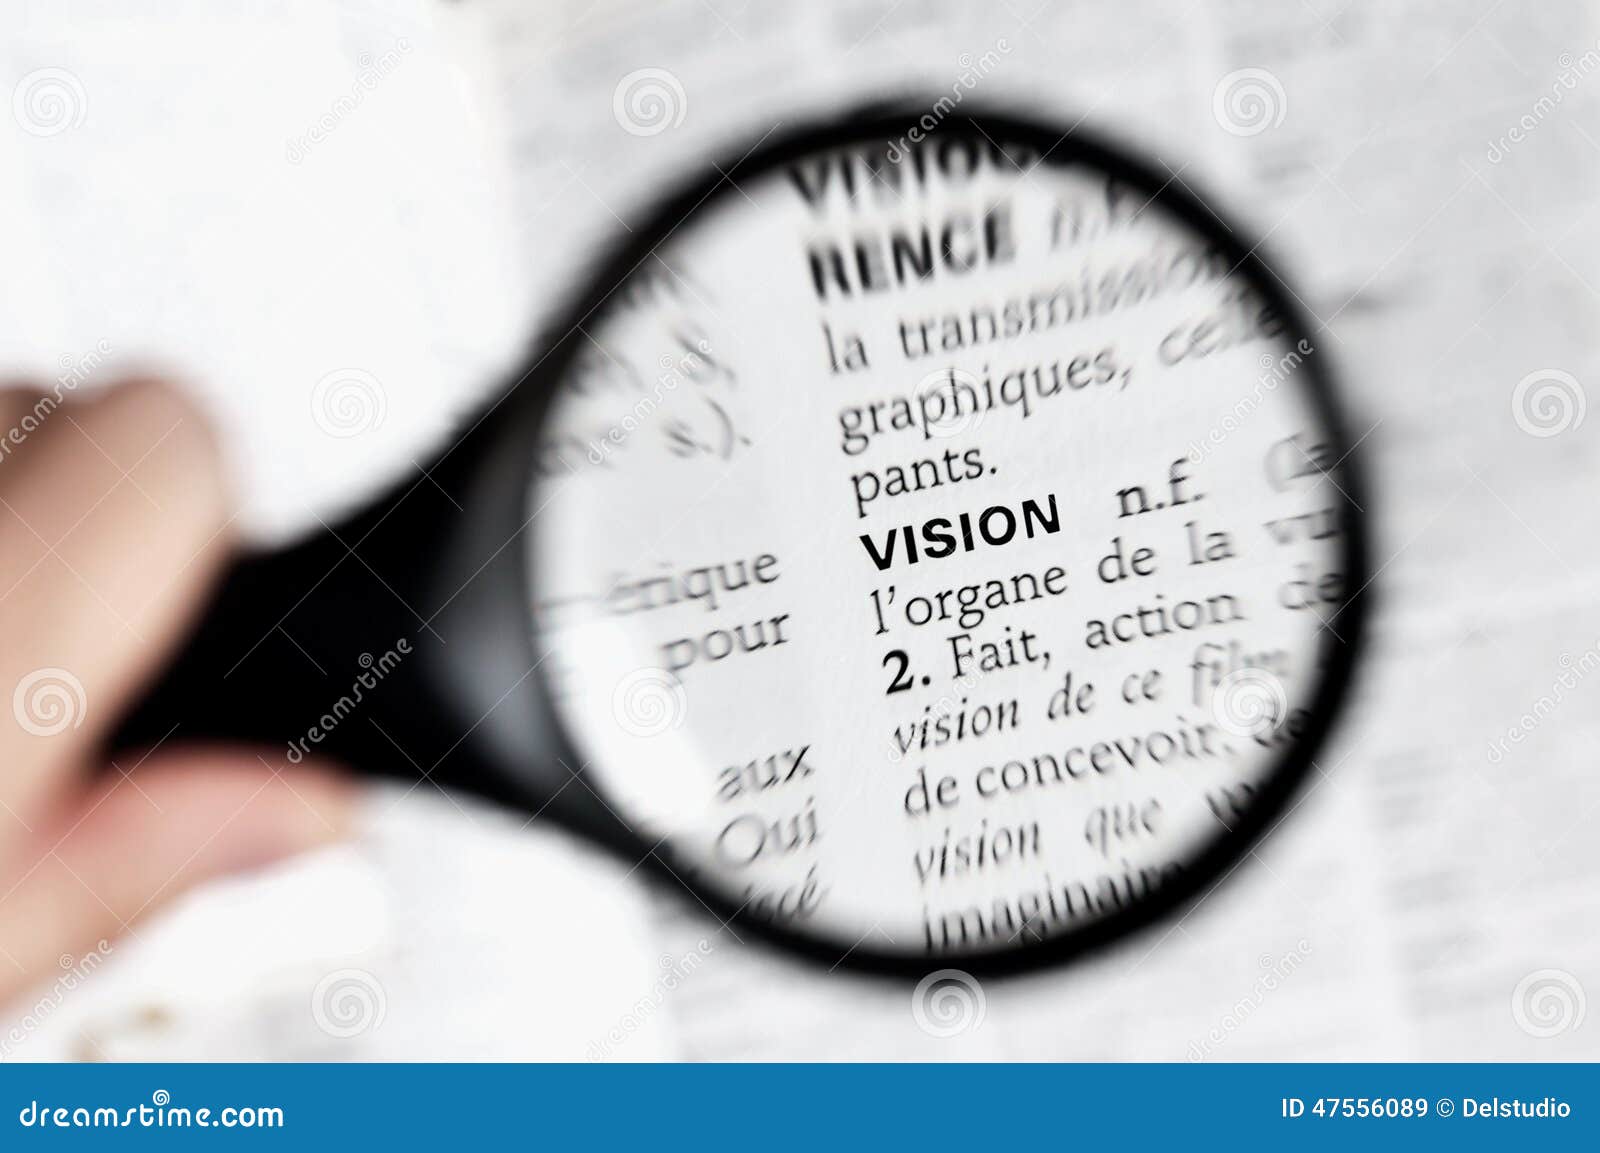 magnifying glass on the word vison in a dictionary